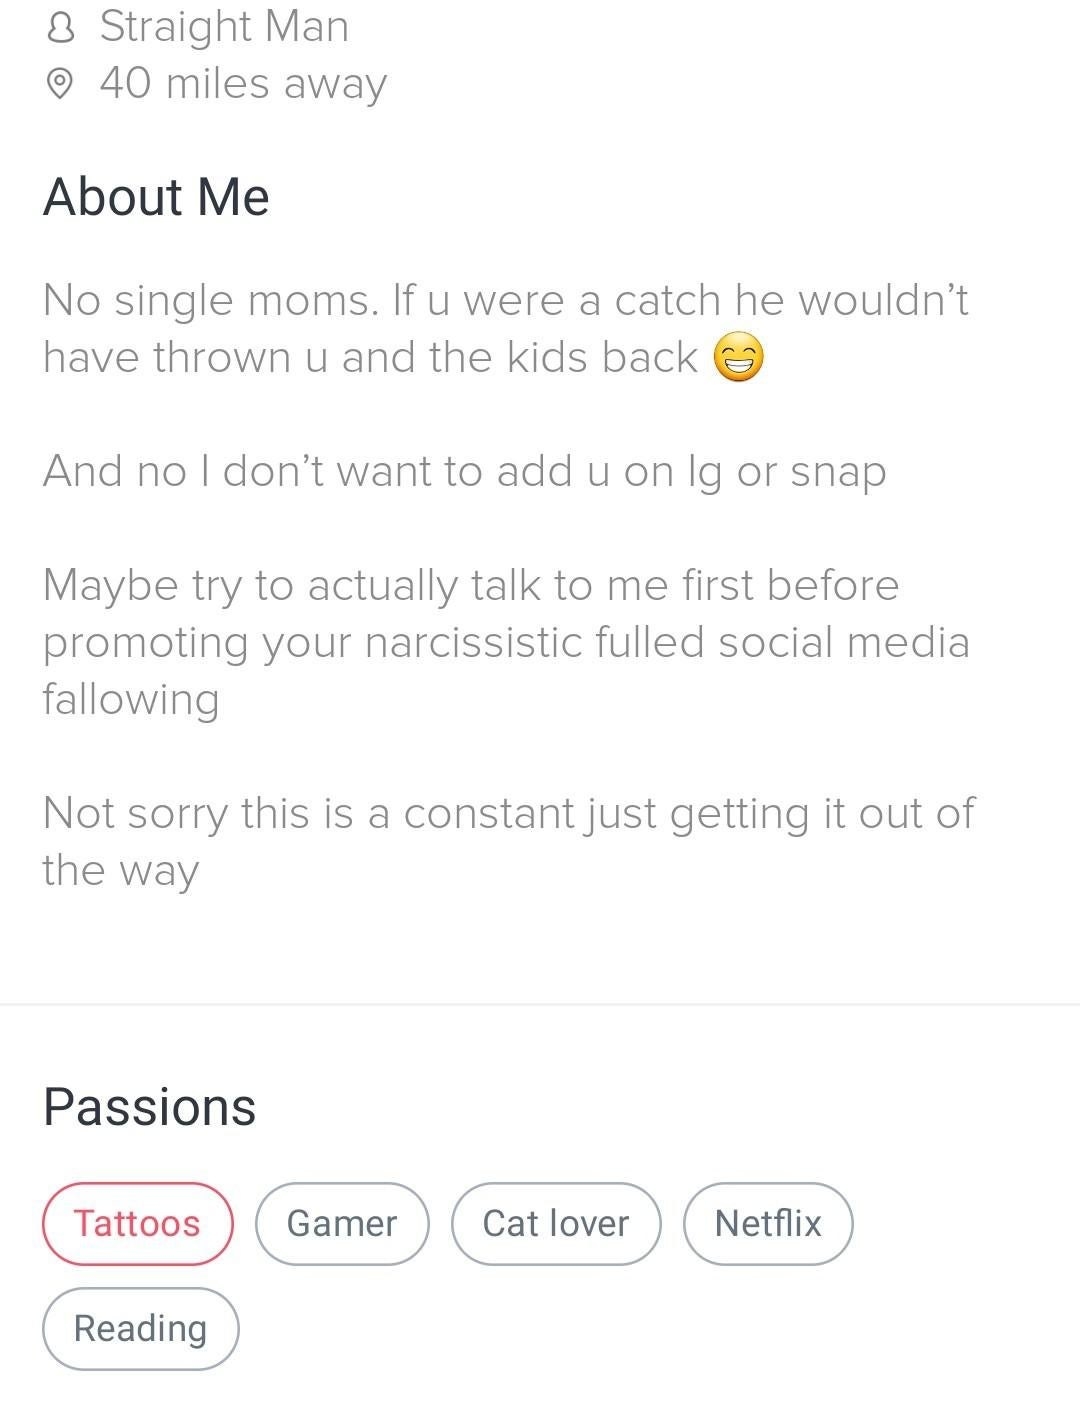 bio saying no single moms because &quot;if u were a catch he wouldn&#x27;t have thrown u and the kids back&quot; and saying he doesn&#x27;t want snap or ig/you promoting your &quot;narcissistic fueled social media following&quot;